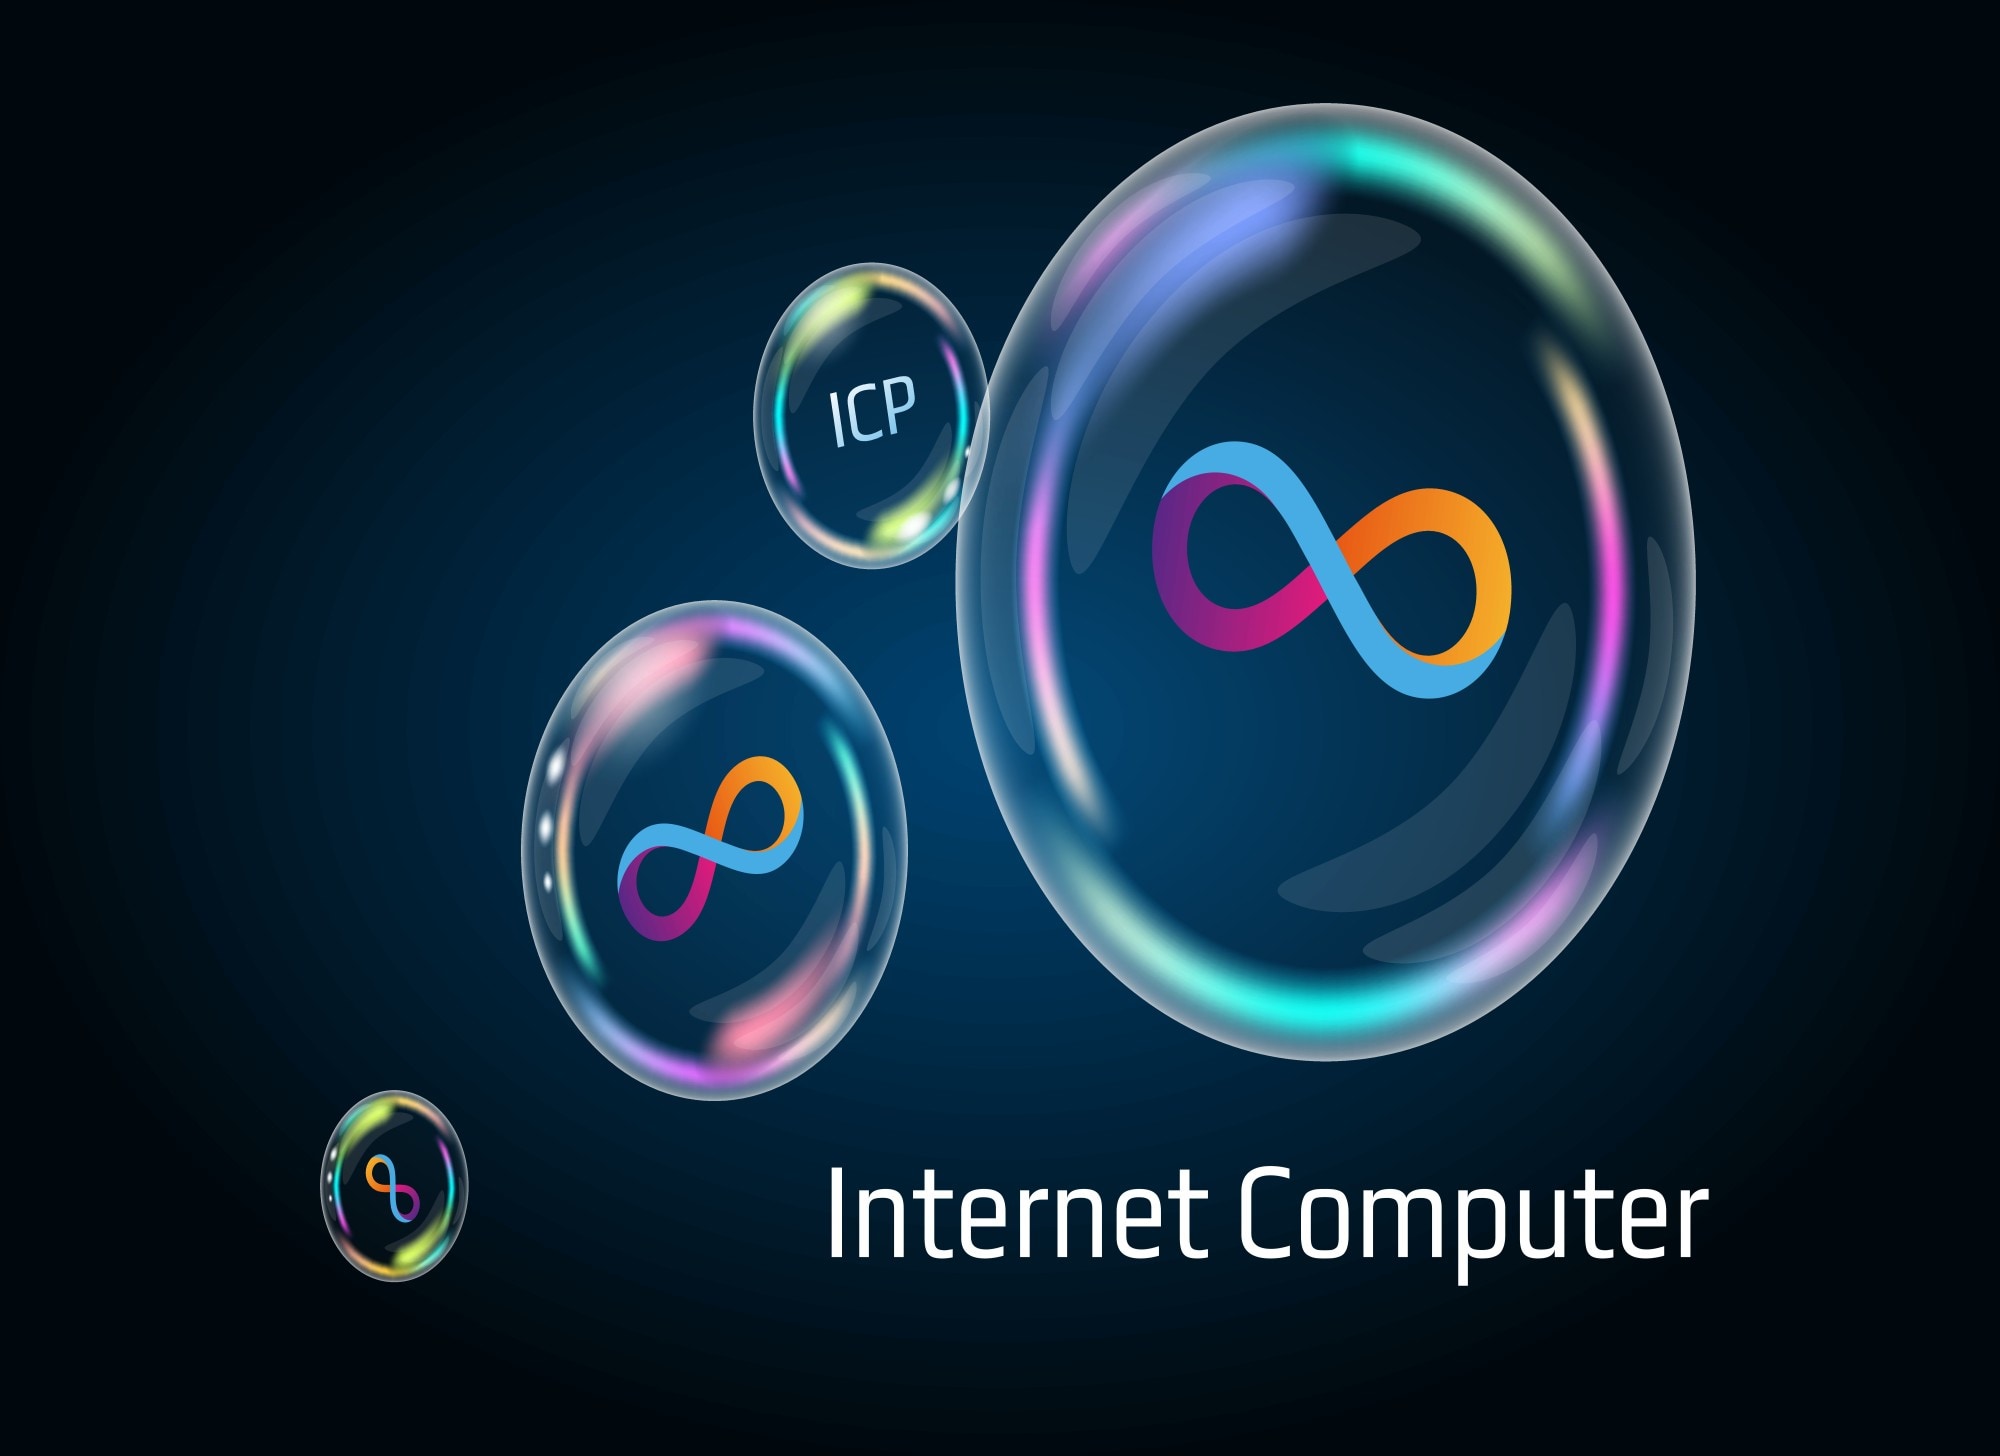  5. Internet Computer:  After three days of launch, Internet Computer had clocked a market value of about $35.8 billion. It was launched last week and its market value skyrocketed to over $90 billion at a price of nearly $731. However, within minutes, investors rushed to book profits, taking its market cap down. The coin is not a joke though - it uses smart contracts, like Ethereum blockchain, that can be used to power a number of platforms and applications. It aspires high and its founders aim to make it a decentralised version of the internet. IT claims to run faster than Ethereum and is way less costly.